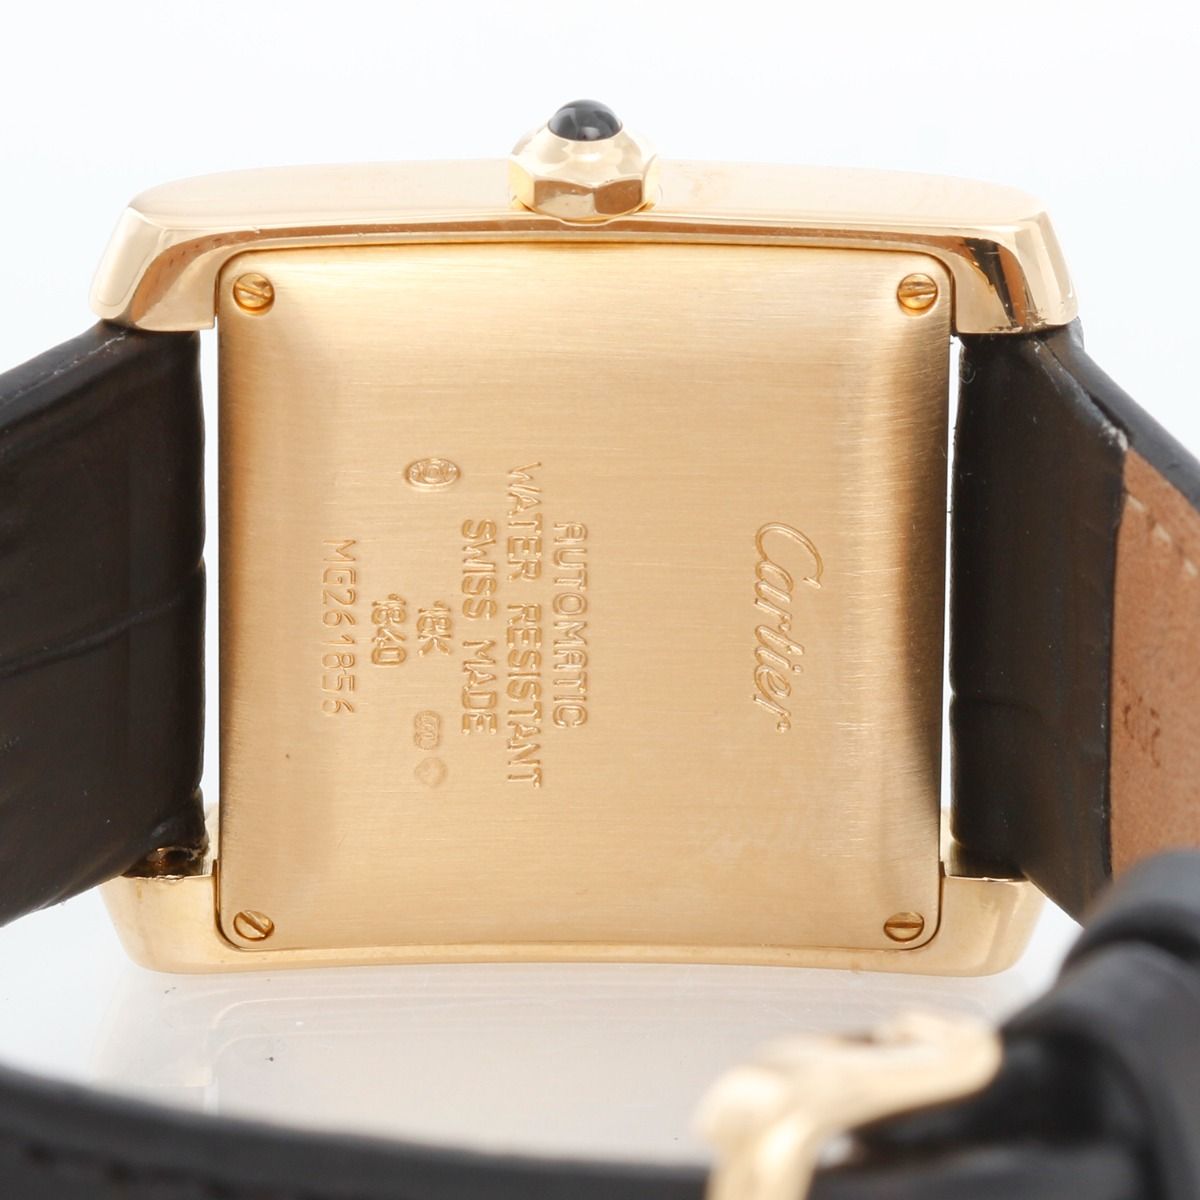 Cartier Tank Francaise Gents 1840 Automatic 18ct Yellow Gold - UK  Specialist Watches